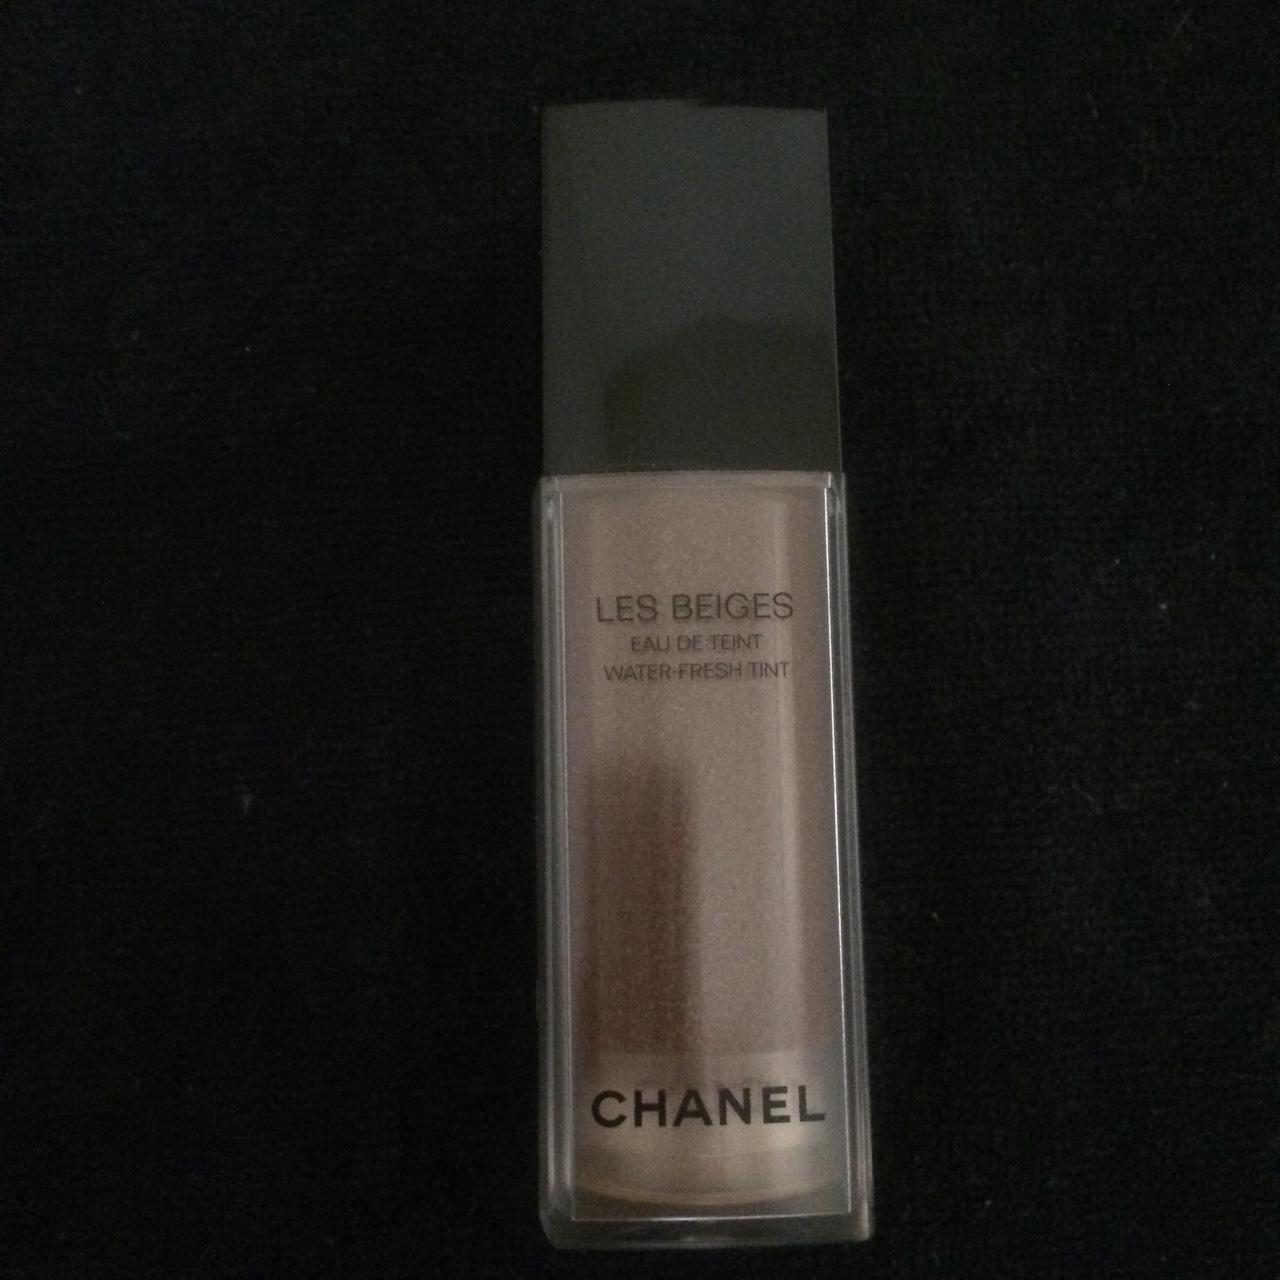 Chanel Les Beiges Water fresh tint Deep No scatola - Depop